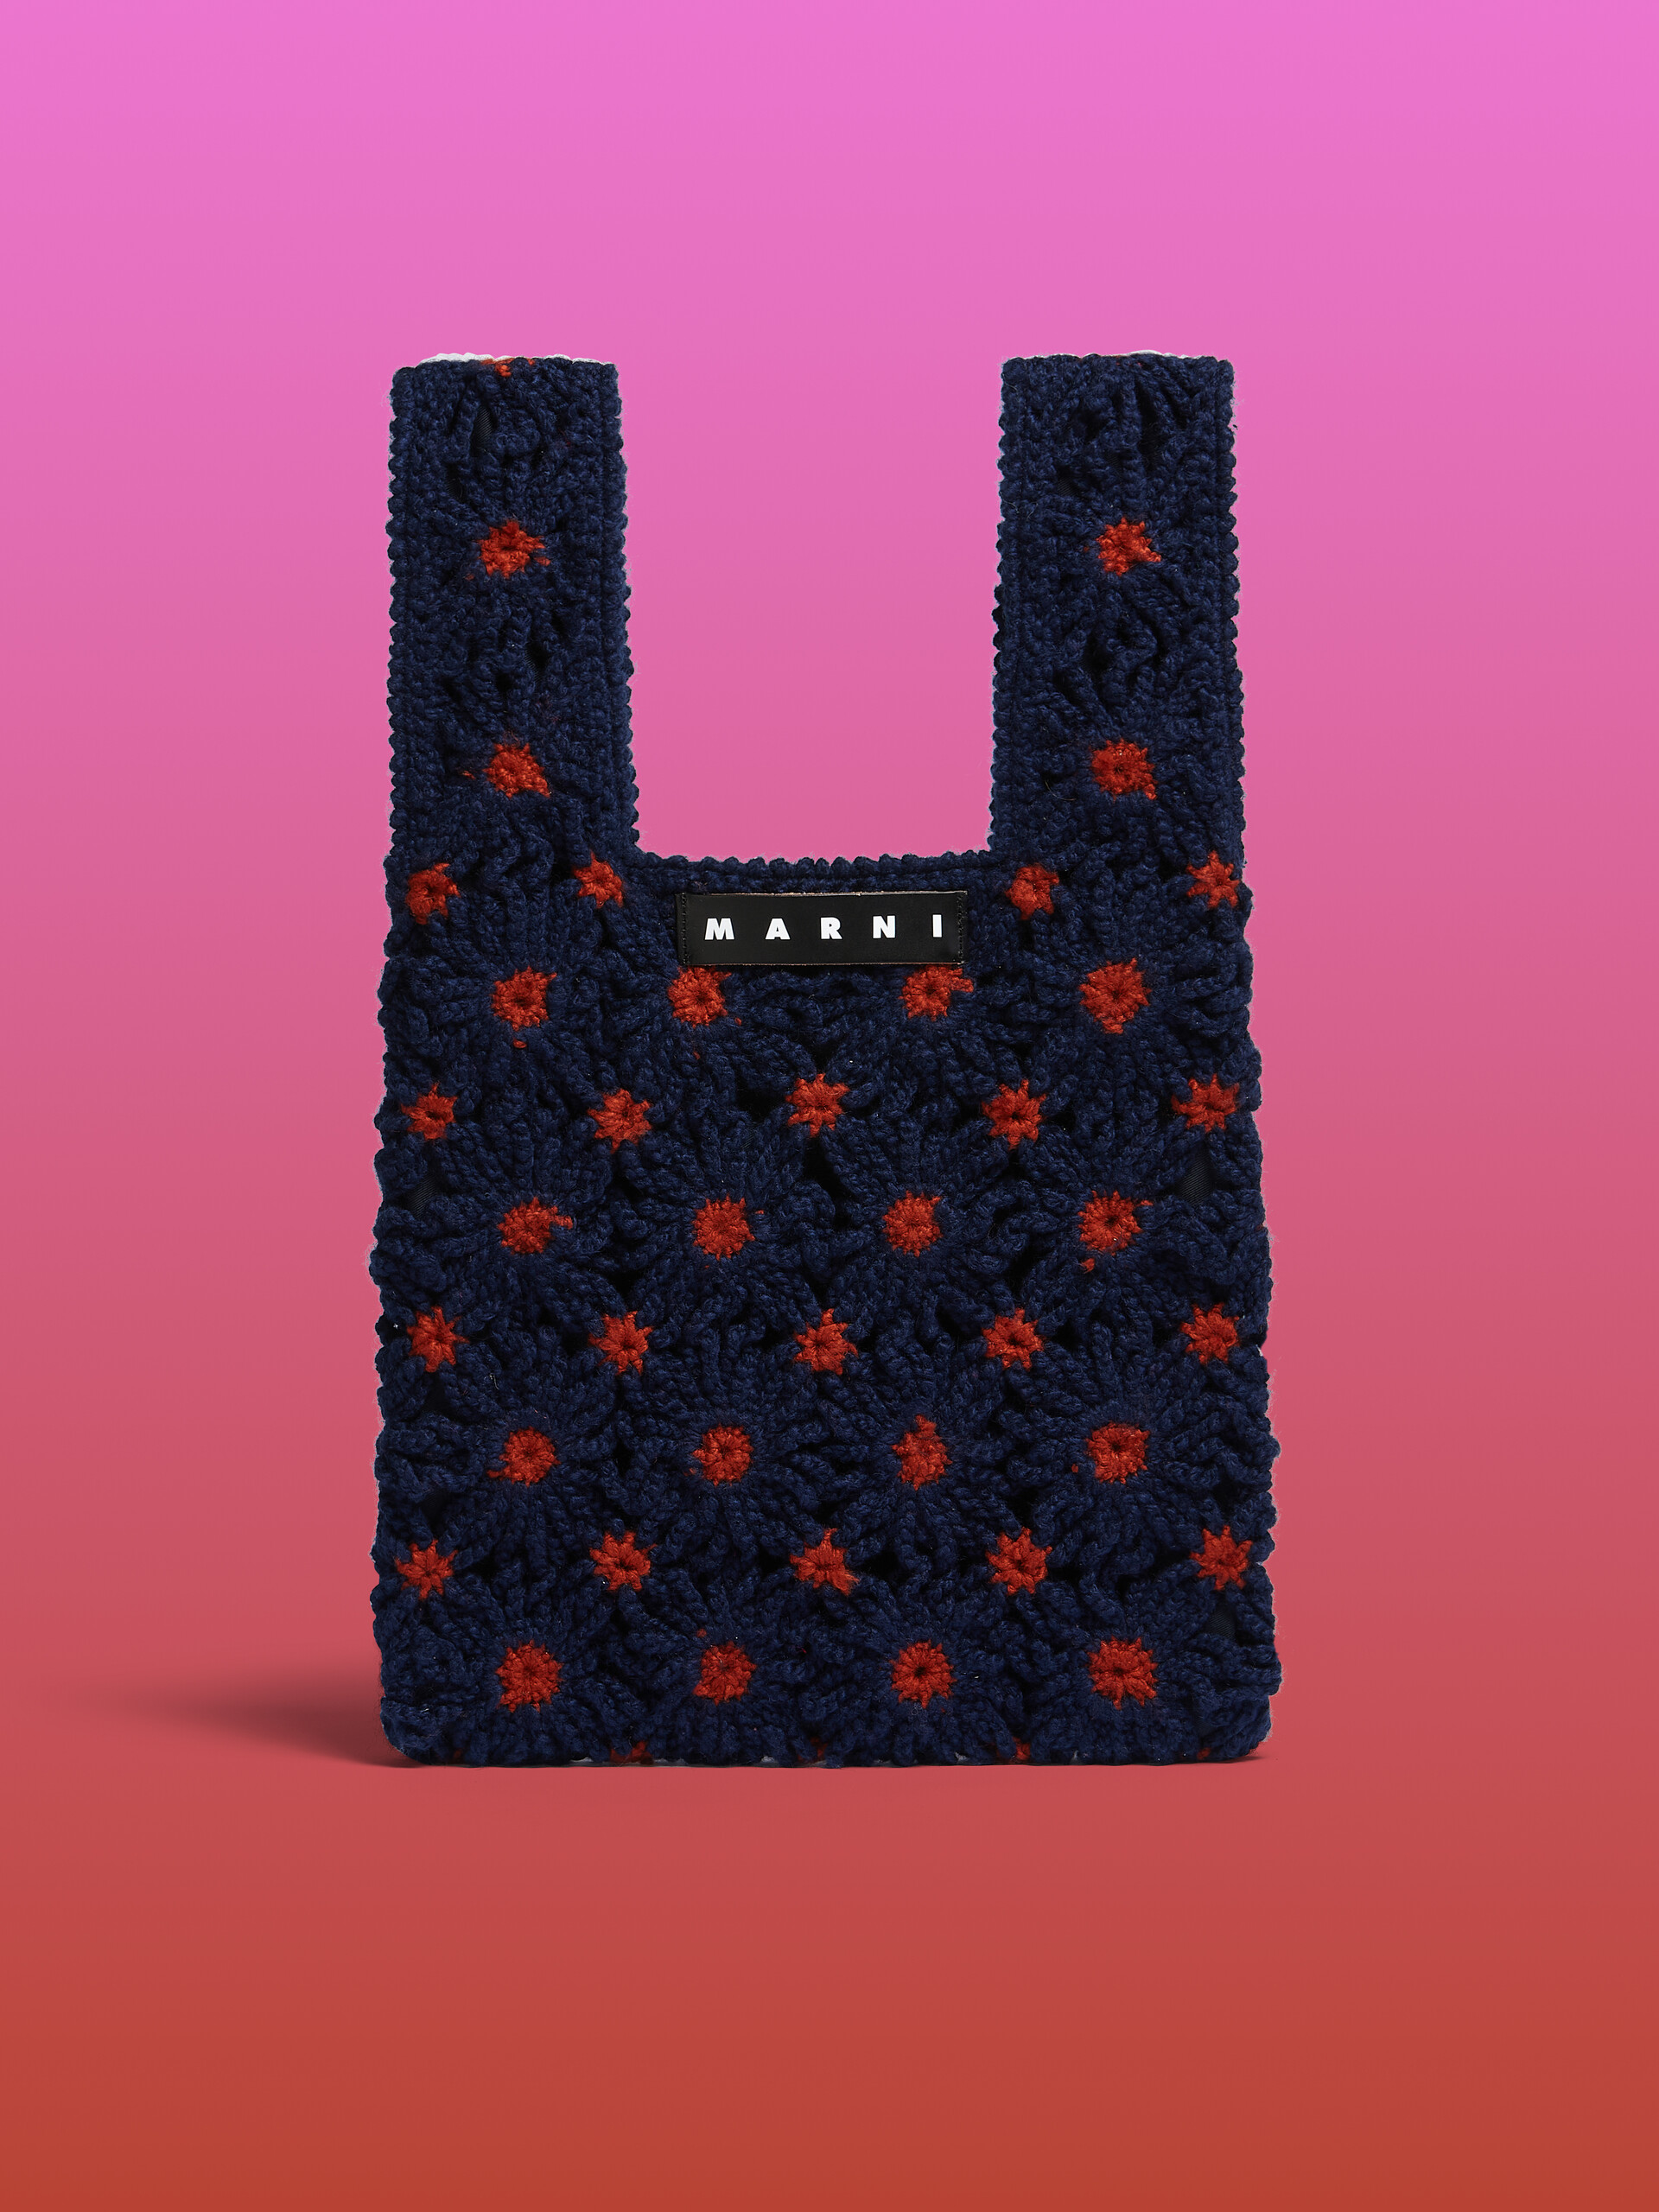 MARNI MARKET FISH bag in blue and red crochet - Shopping Bags - Image 1